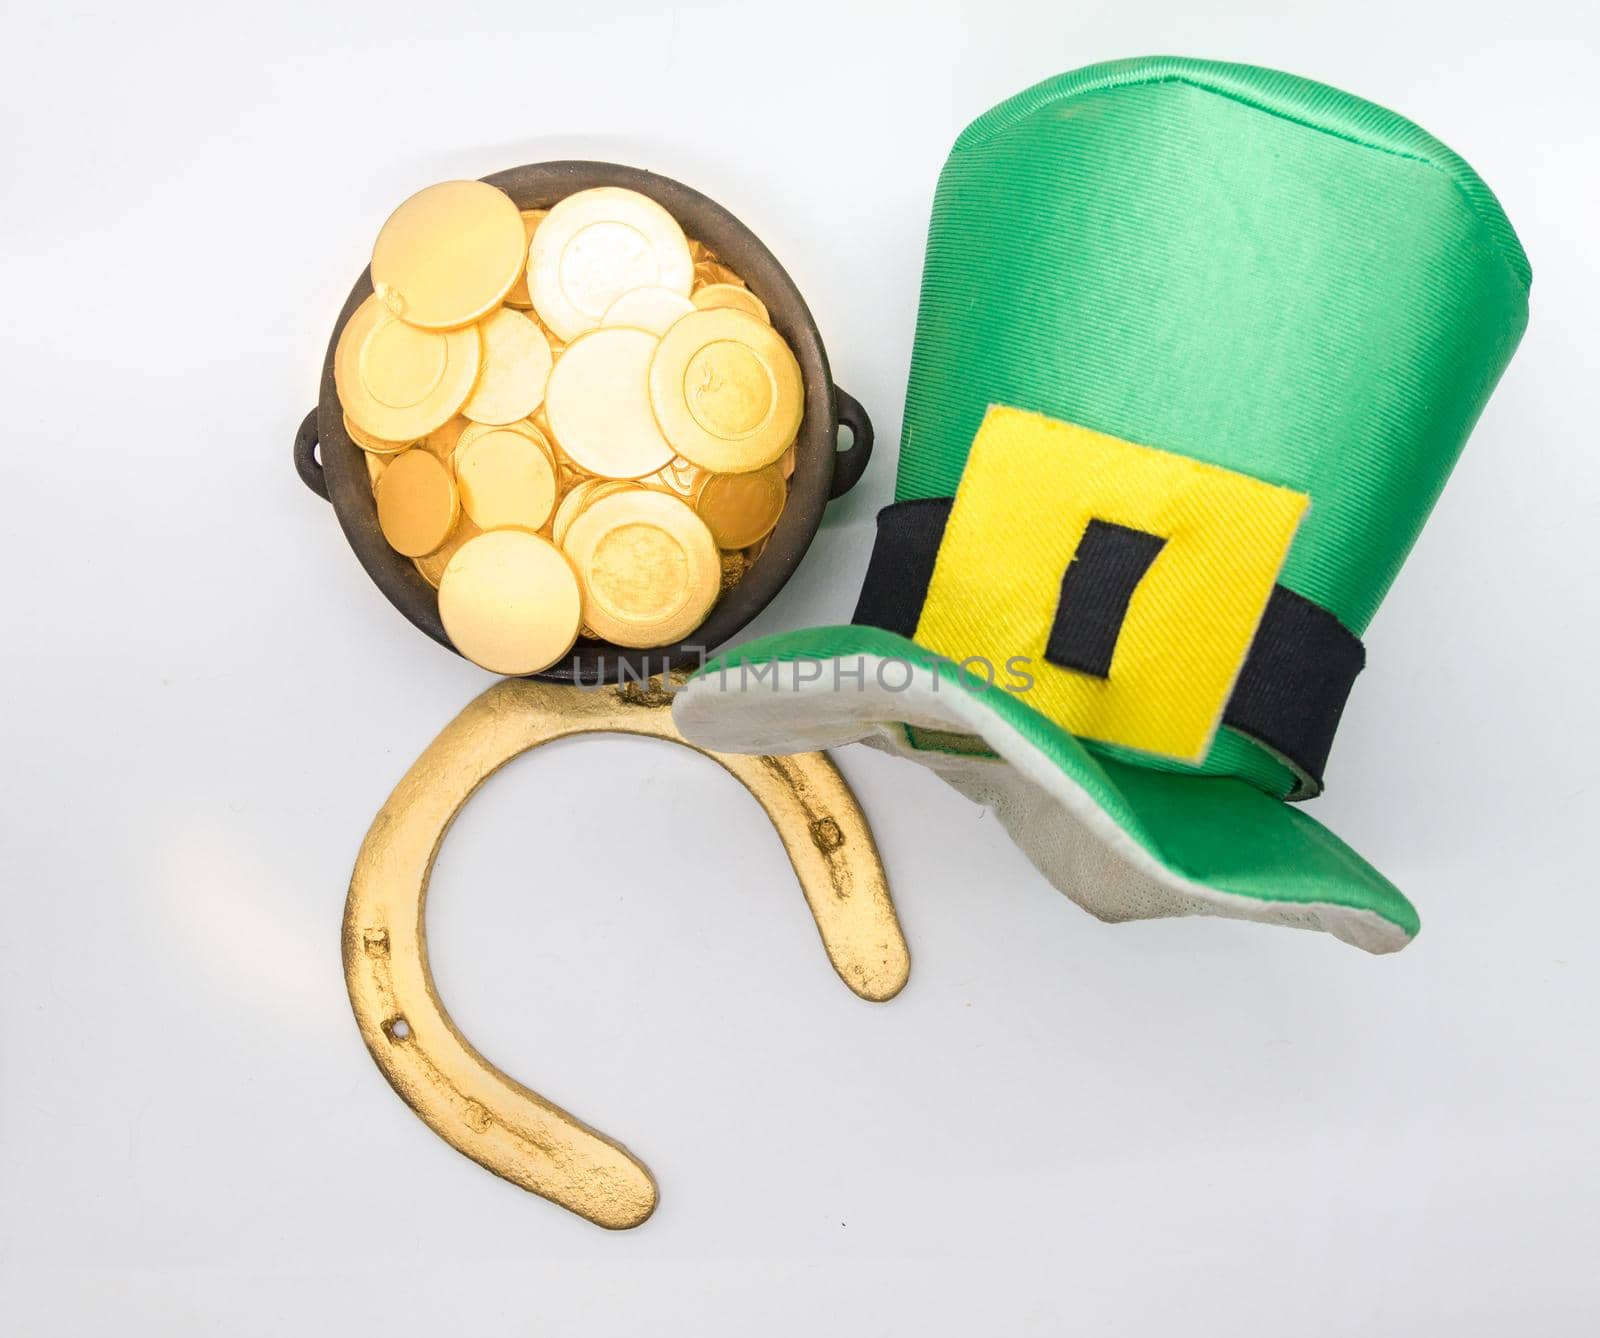 horseshoe galley and saint patrick's day coins by GabrielaBertolini